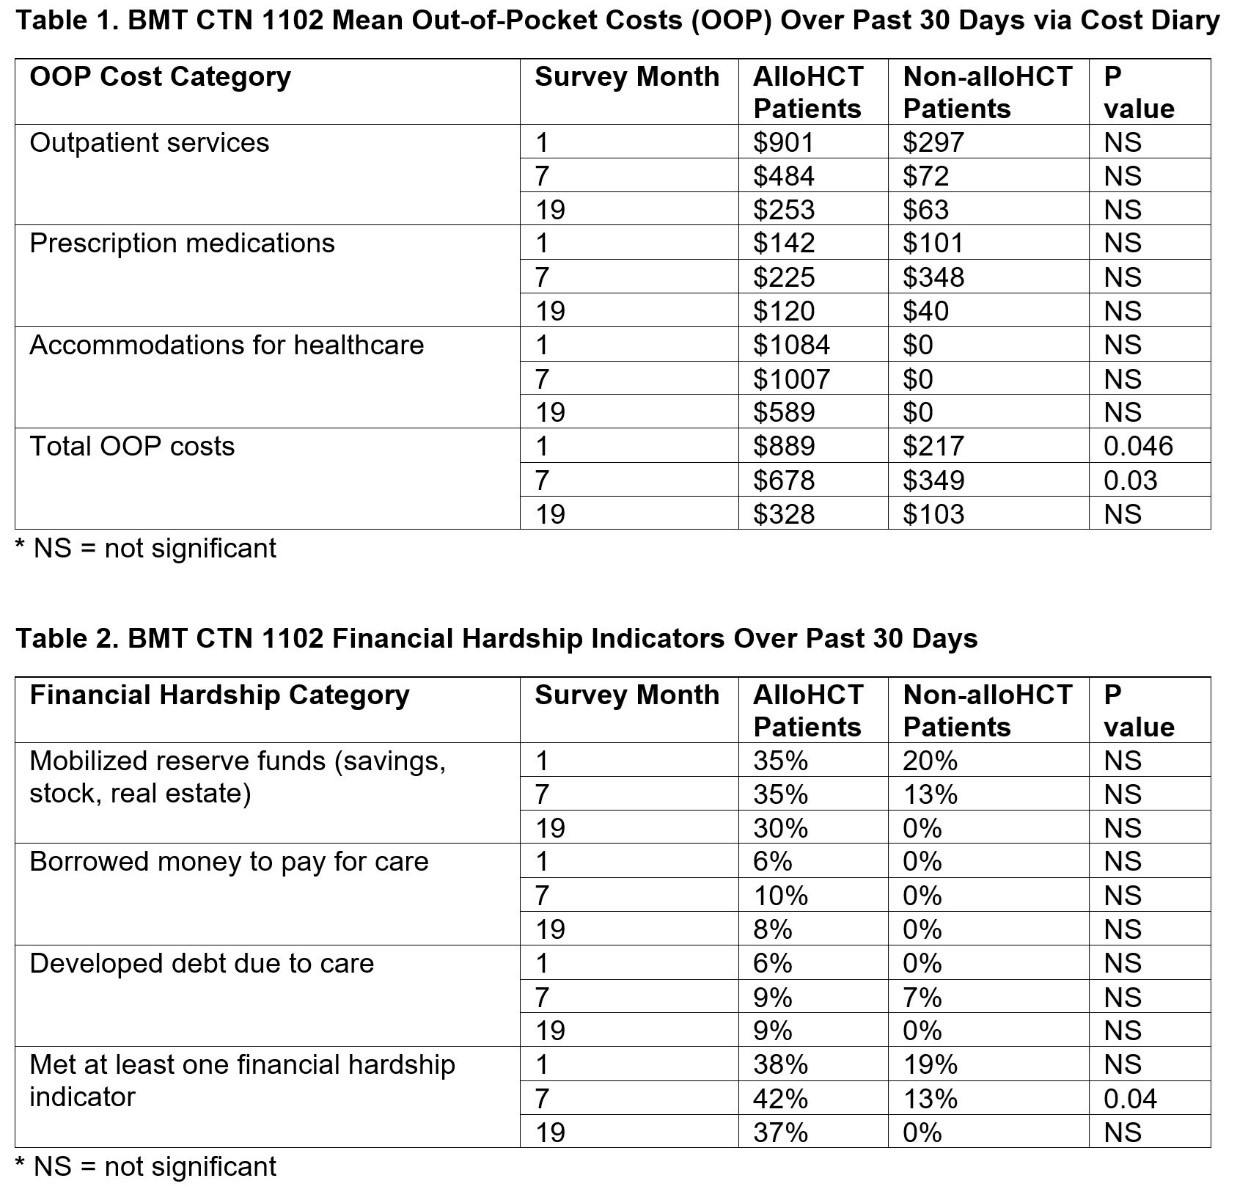 This figure displays OOP costs and financial hardship indicators for transplant and non-transplant (supportive care) patients, with p-values displayed for significant relationships only.